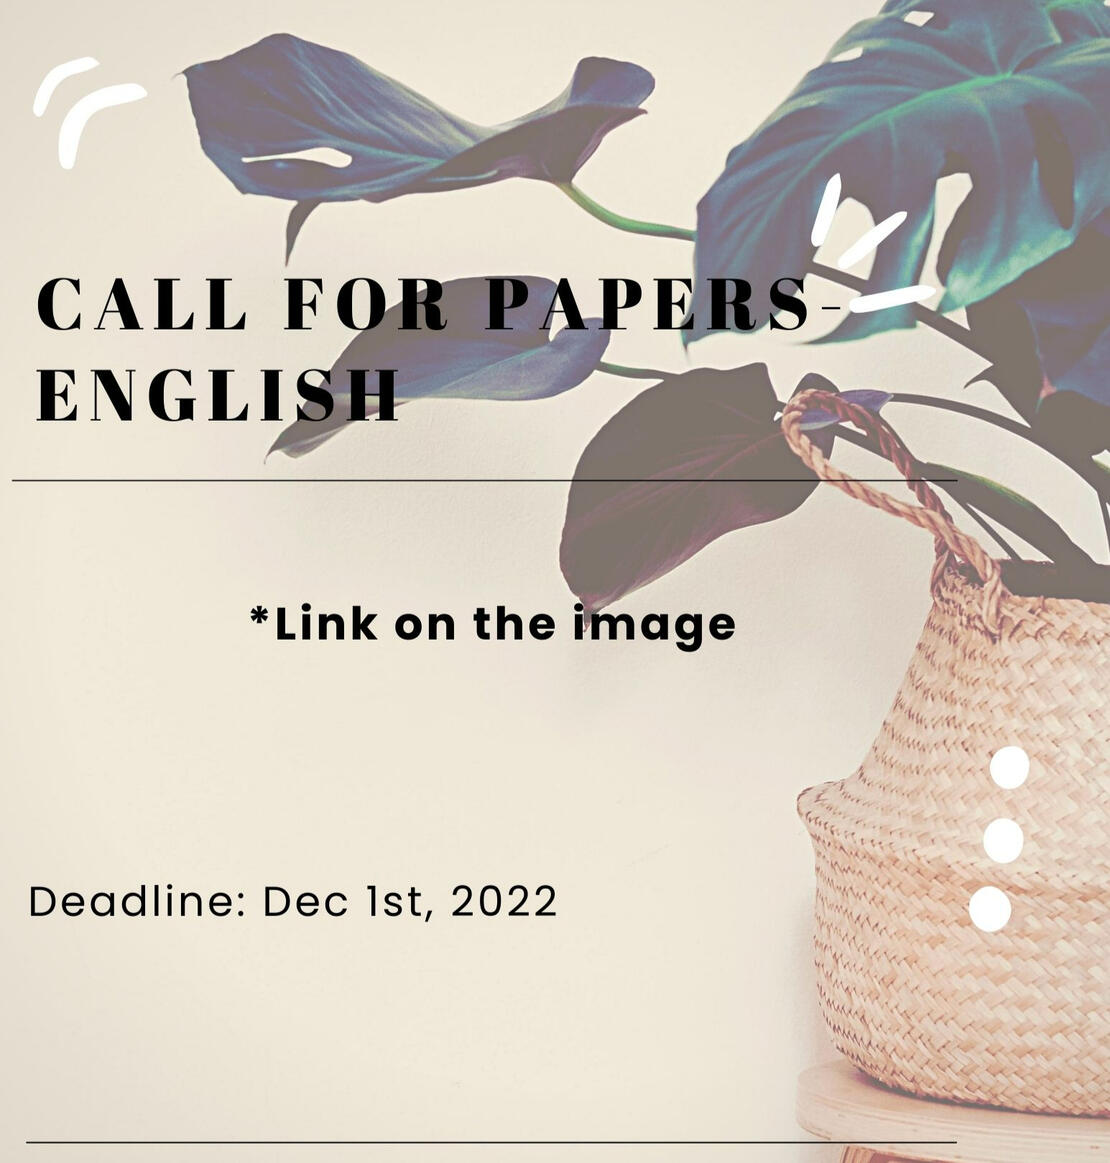 Call for papers - English